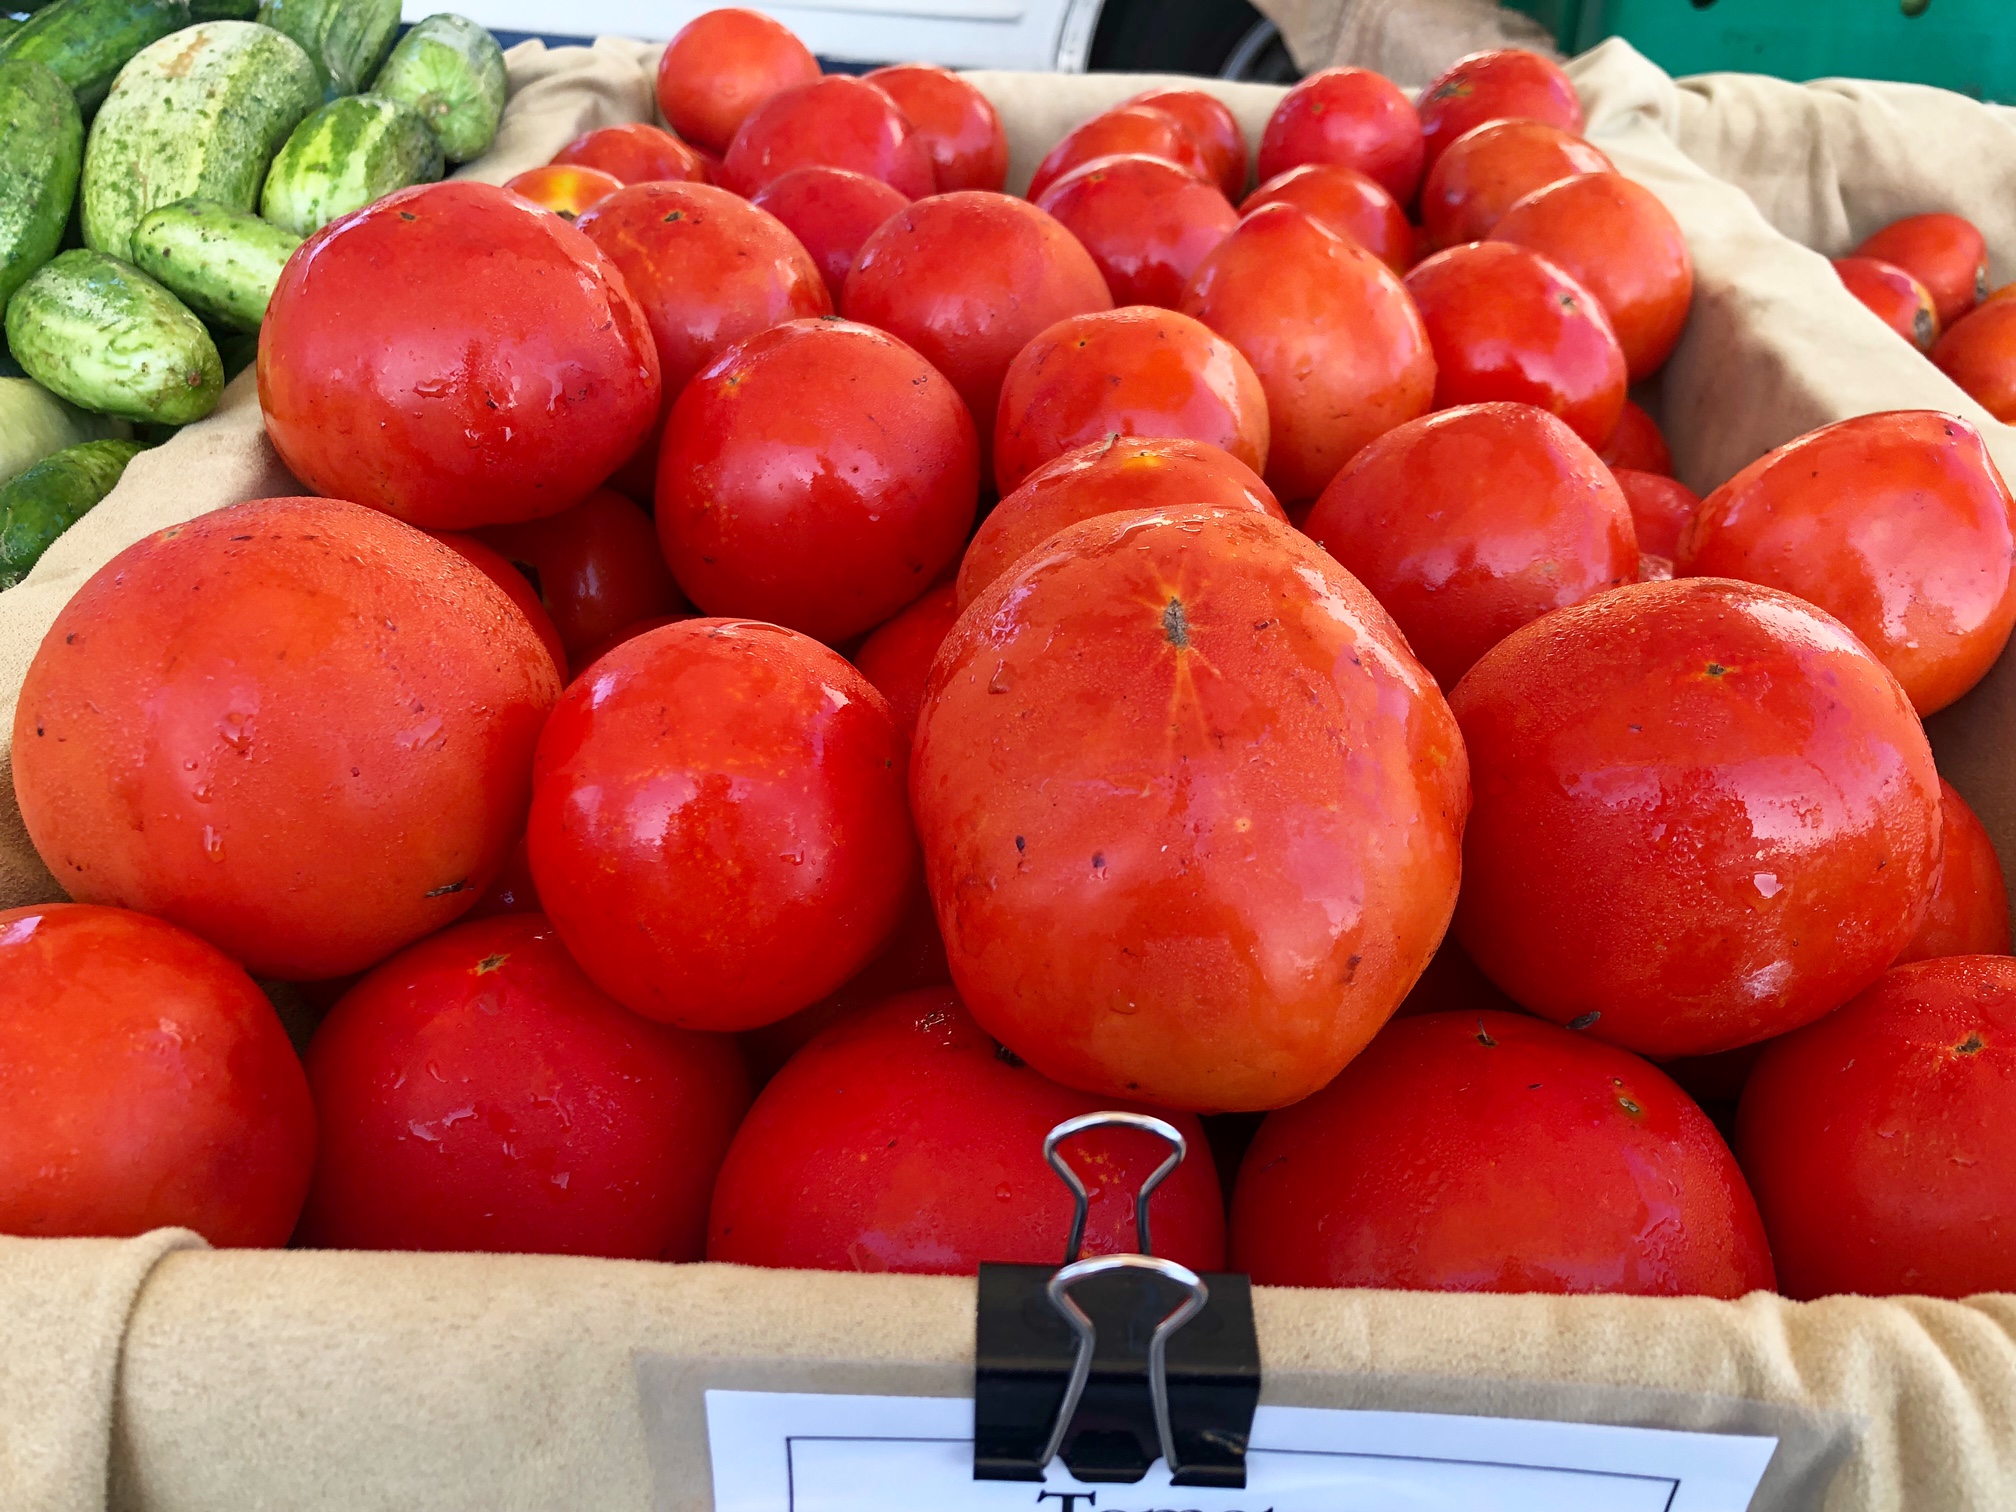 In a burlap wrapped basket at the Urbana Market in the Square, many tomatoes fill the container. They are bright red and dewy in the morning light. Photo by Alyssa Buckley.